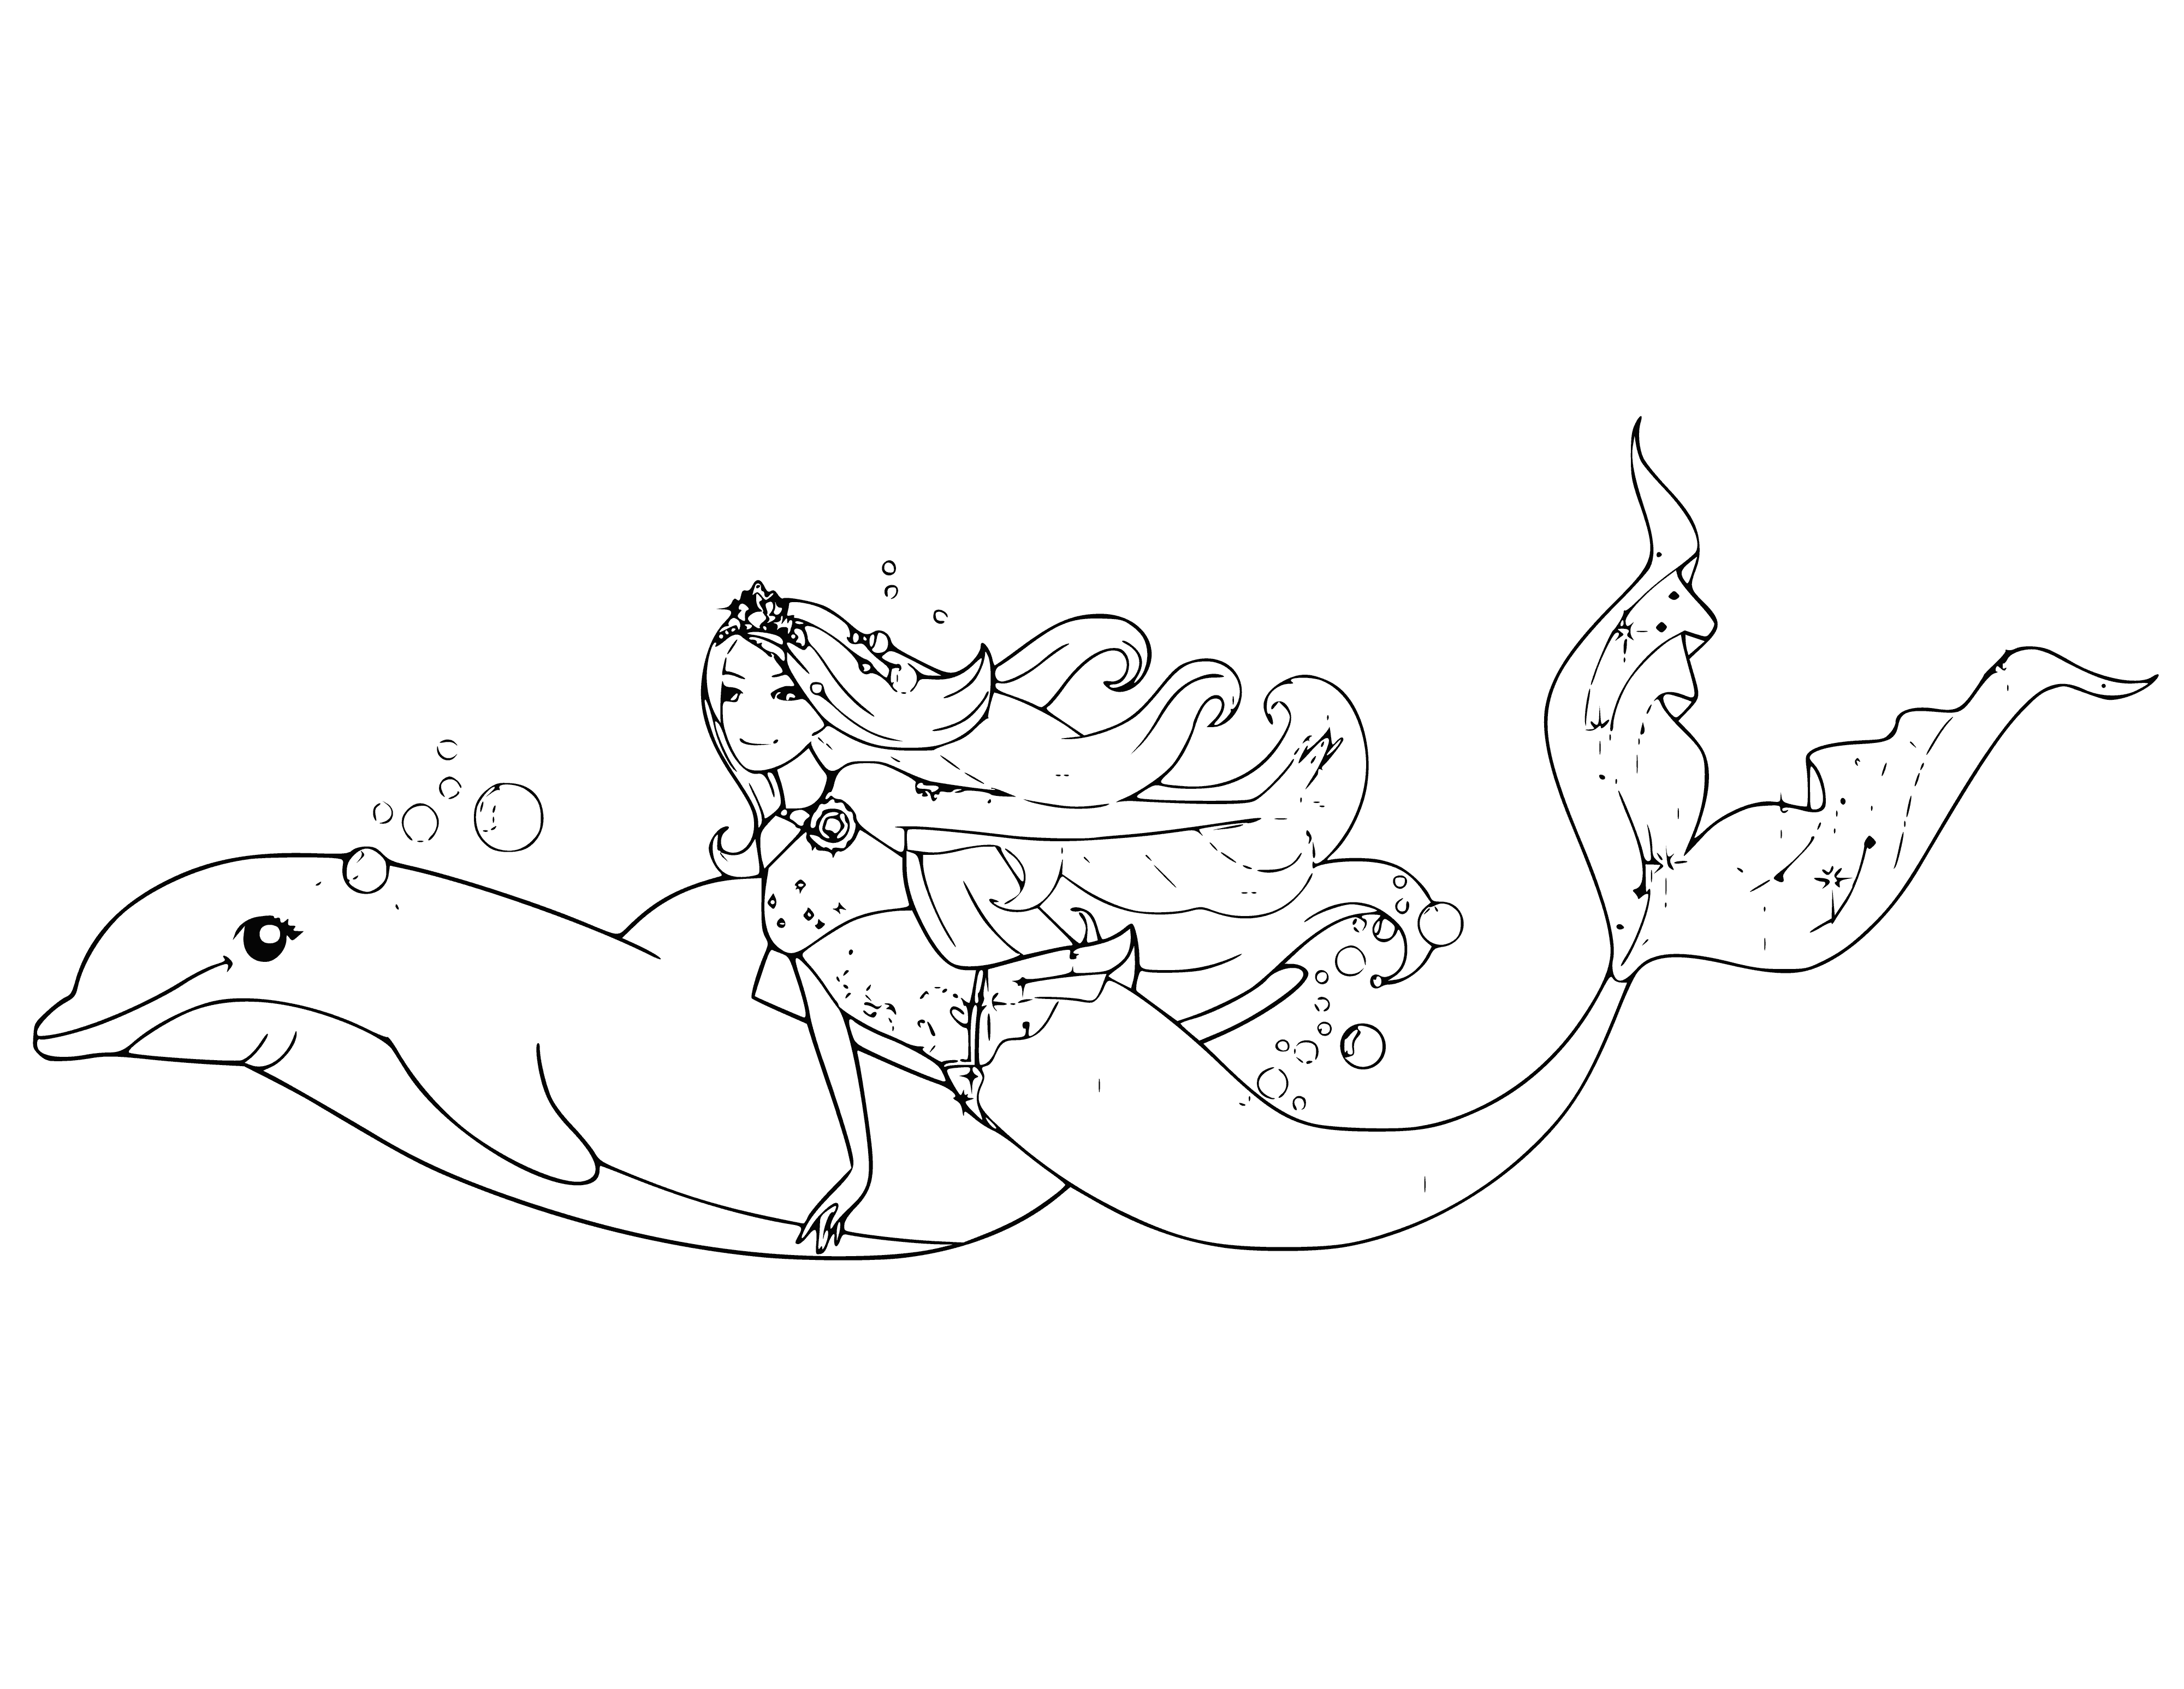 coloring page: Barbie is a happy mermaid surrounded by dancing dolphins. Wearing a pink seashell bikini and necklace, she takes in the underwater beauty.